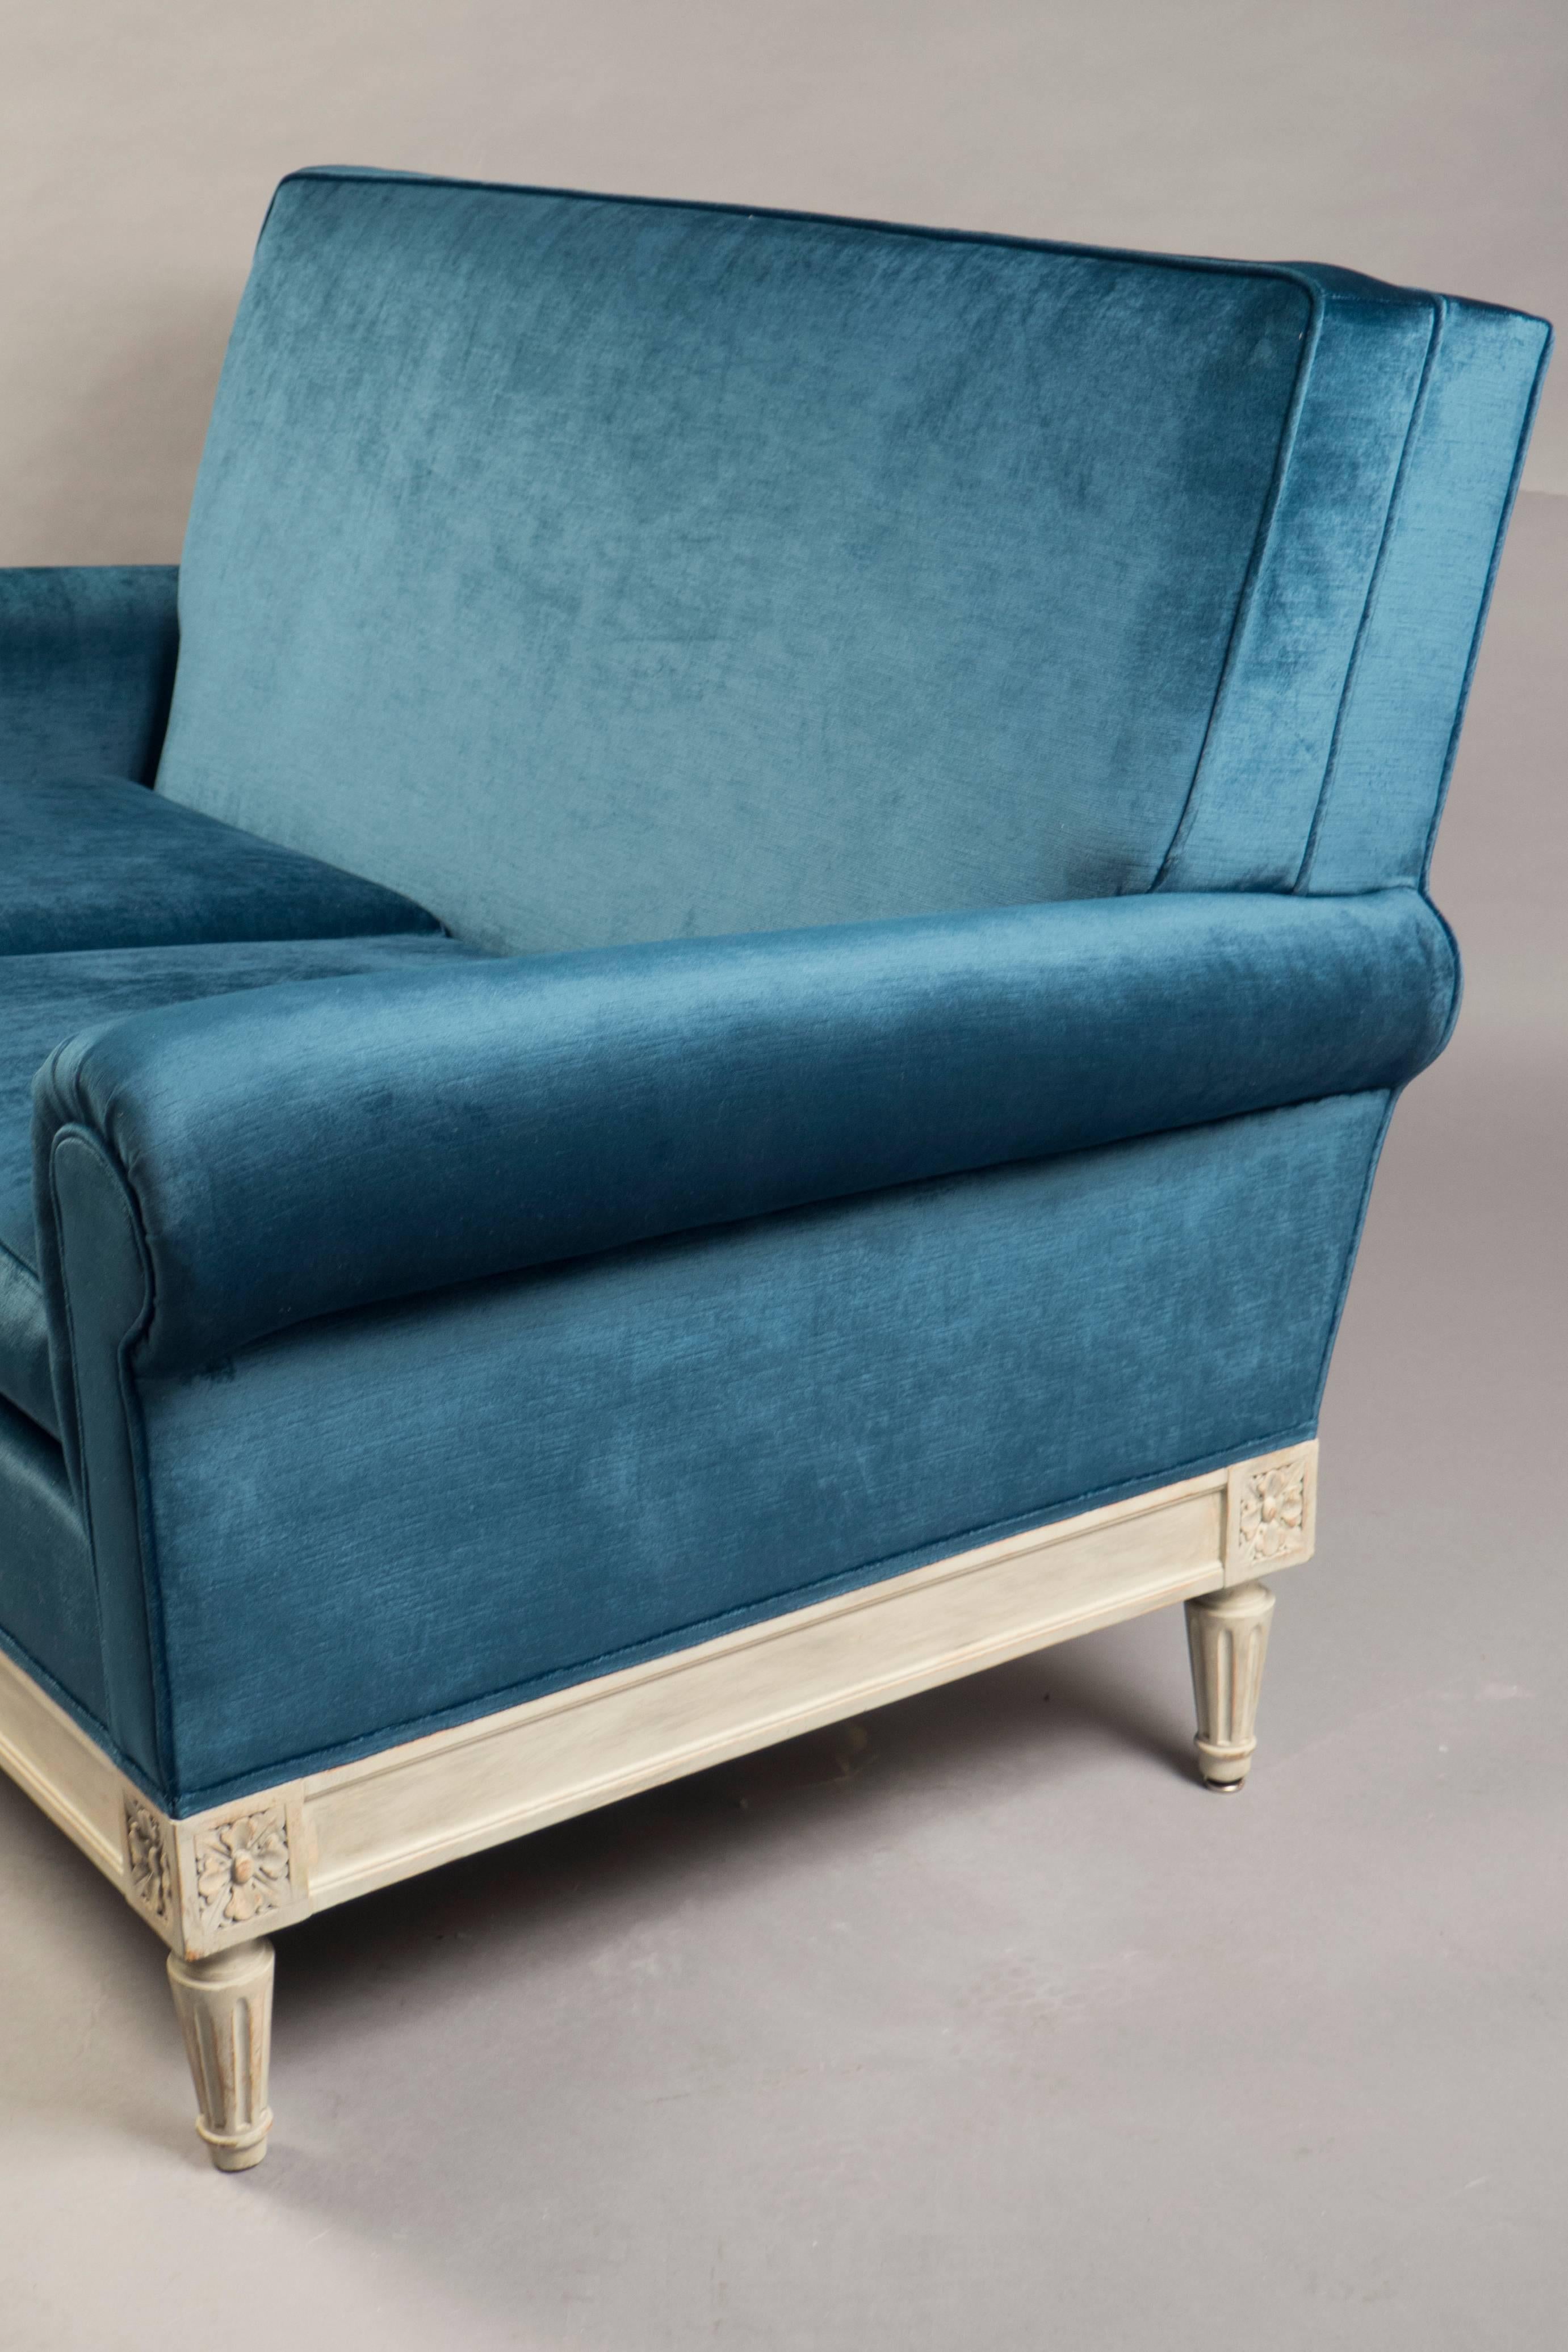 Two-seat sofa with a white-washed wooden base with classical rosette carvings and tapered legs, supporting an over-upholstered seat, back and sides, covered in rose Cumming’s antique blue velvet.

Measures: Height back 33.5”, width 54”, depth